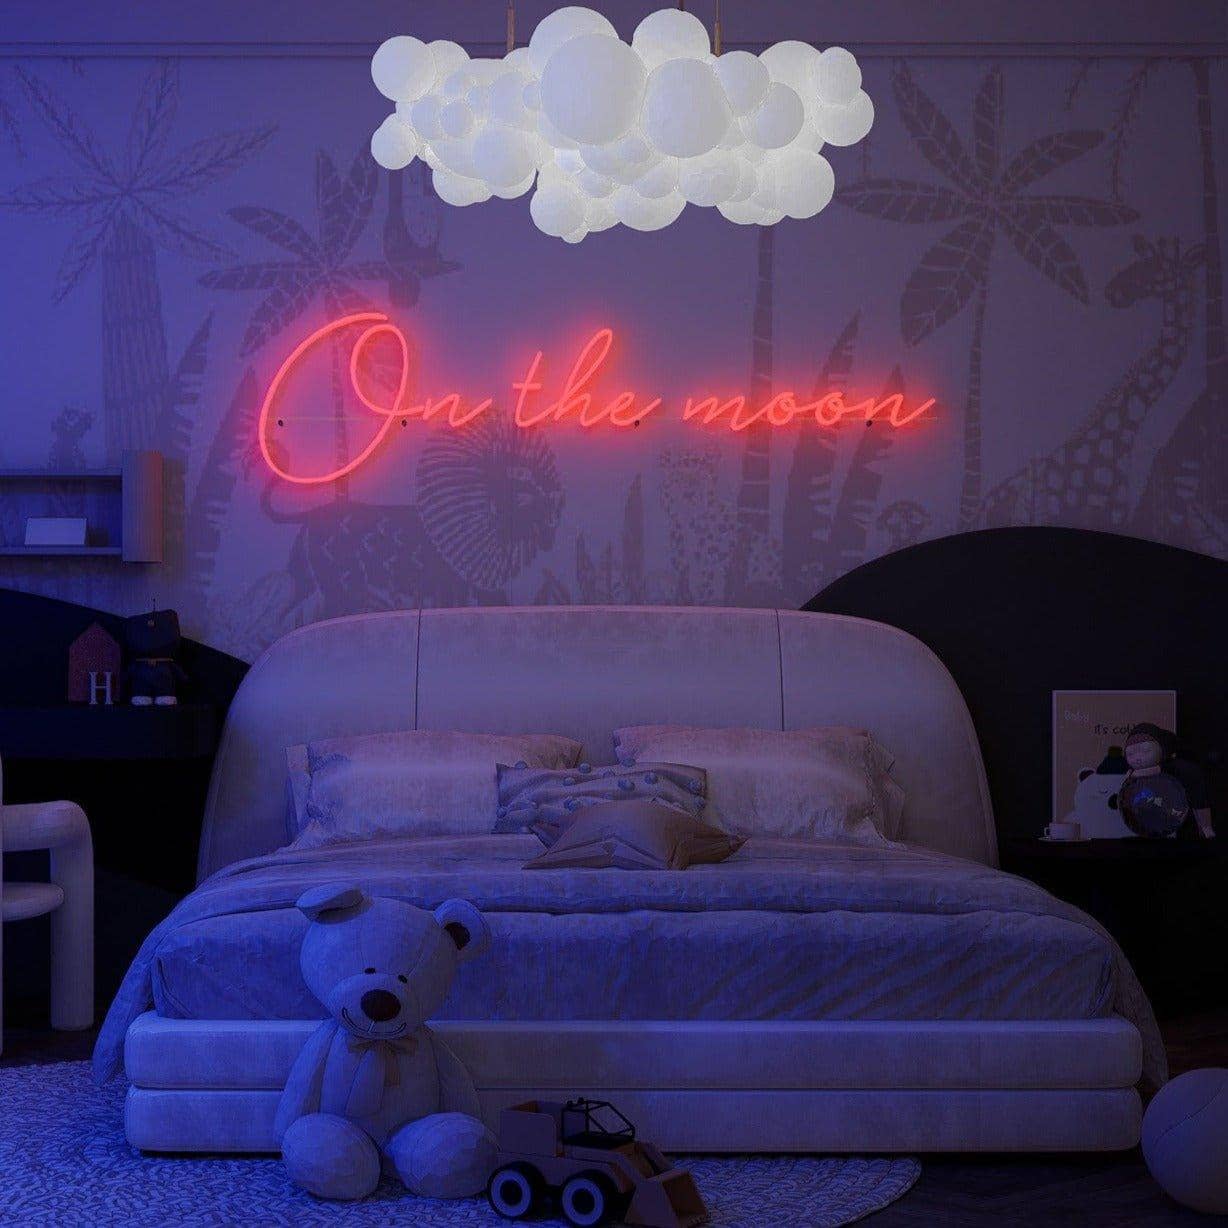 night-shot-of-lit-red-neon-lights-hanging-on-display-in-bedroom-on-the-moon